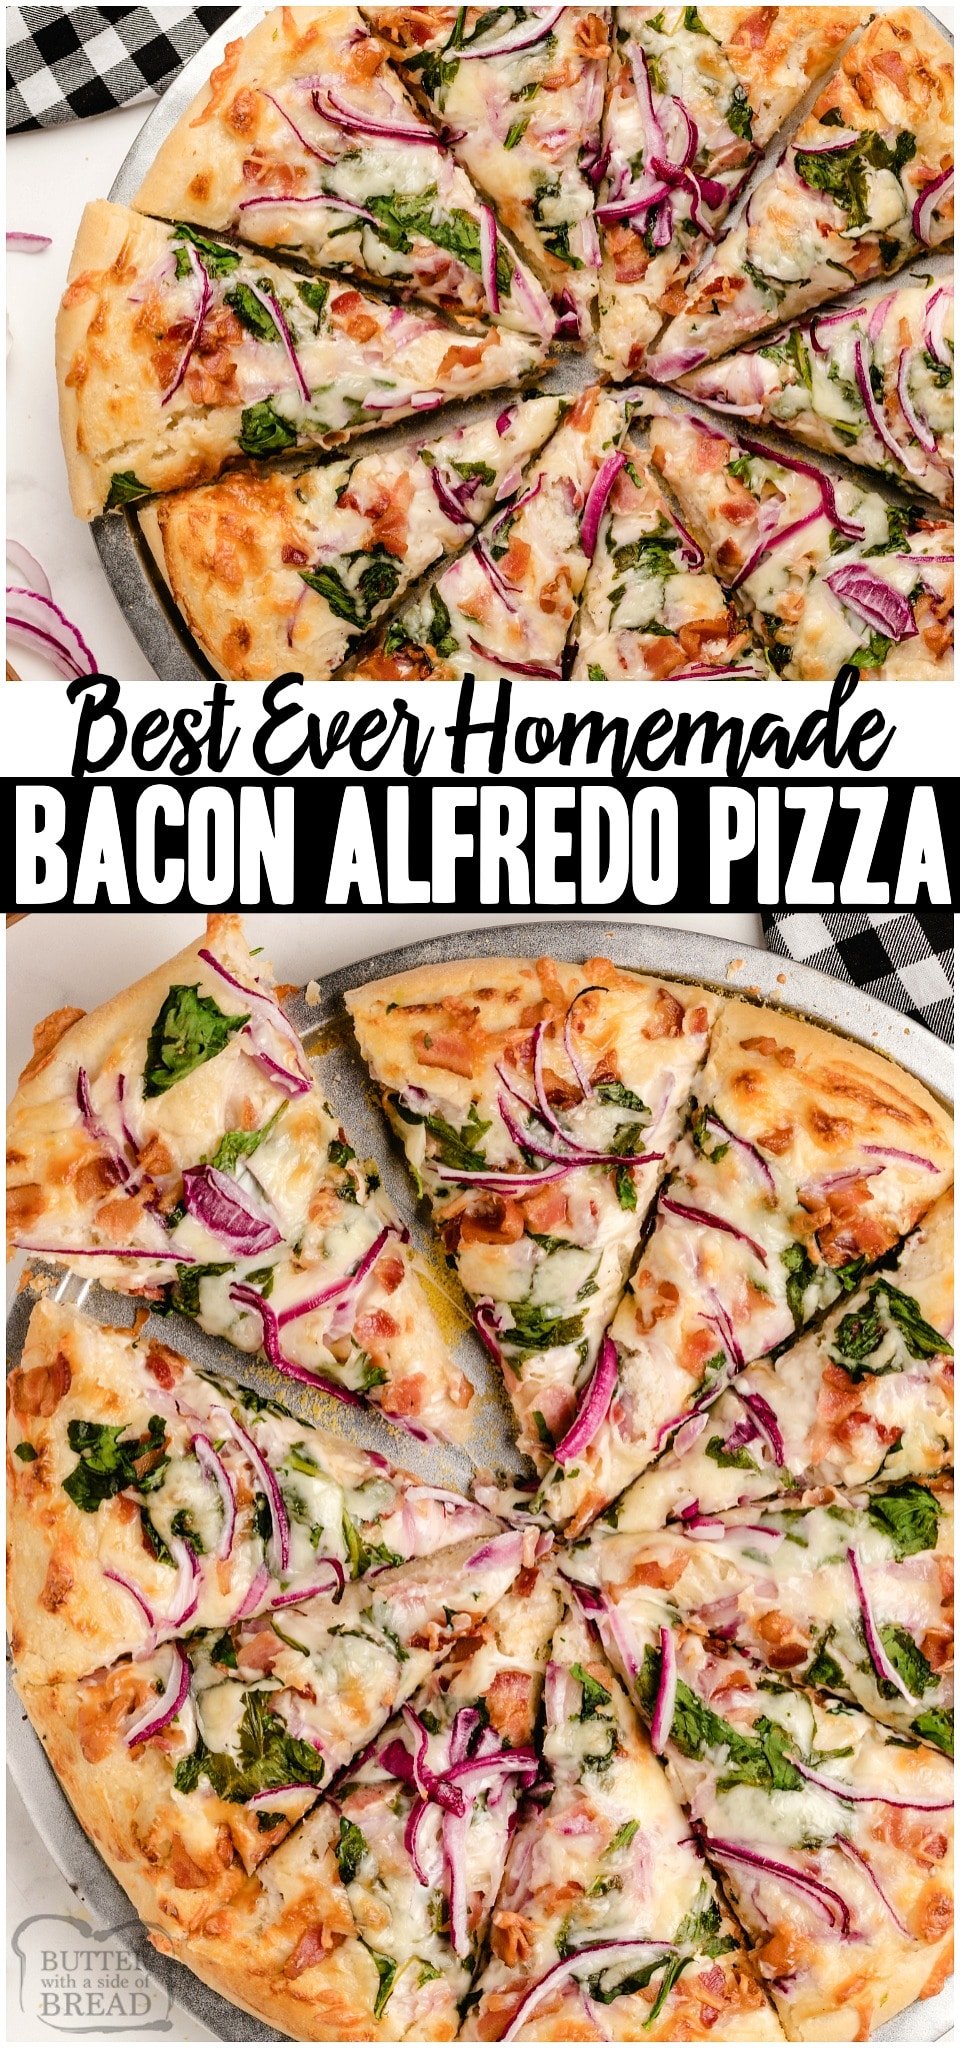 Bacon Alfredo Pizza baked fresh with cheesy Alfredo sauce topped with crispy bacon, cheese and some veggies! Easy recipe yields two Homemade Pizzas perfect for a fun weeknight dinner! #pizza #bacon #alfredo #homemade #recipe from BUTTER WITH A SIDE OF BREAD